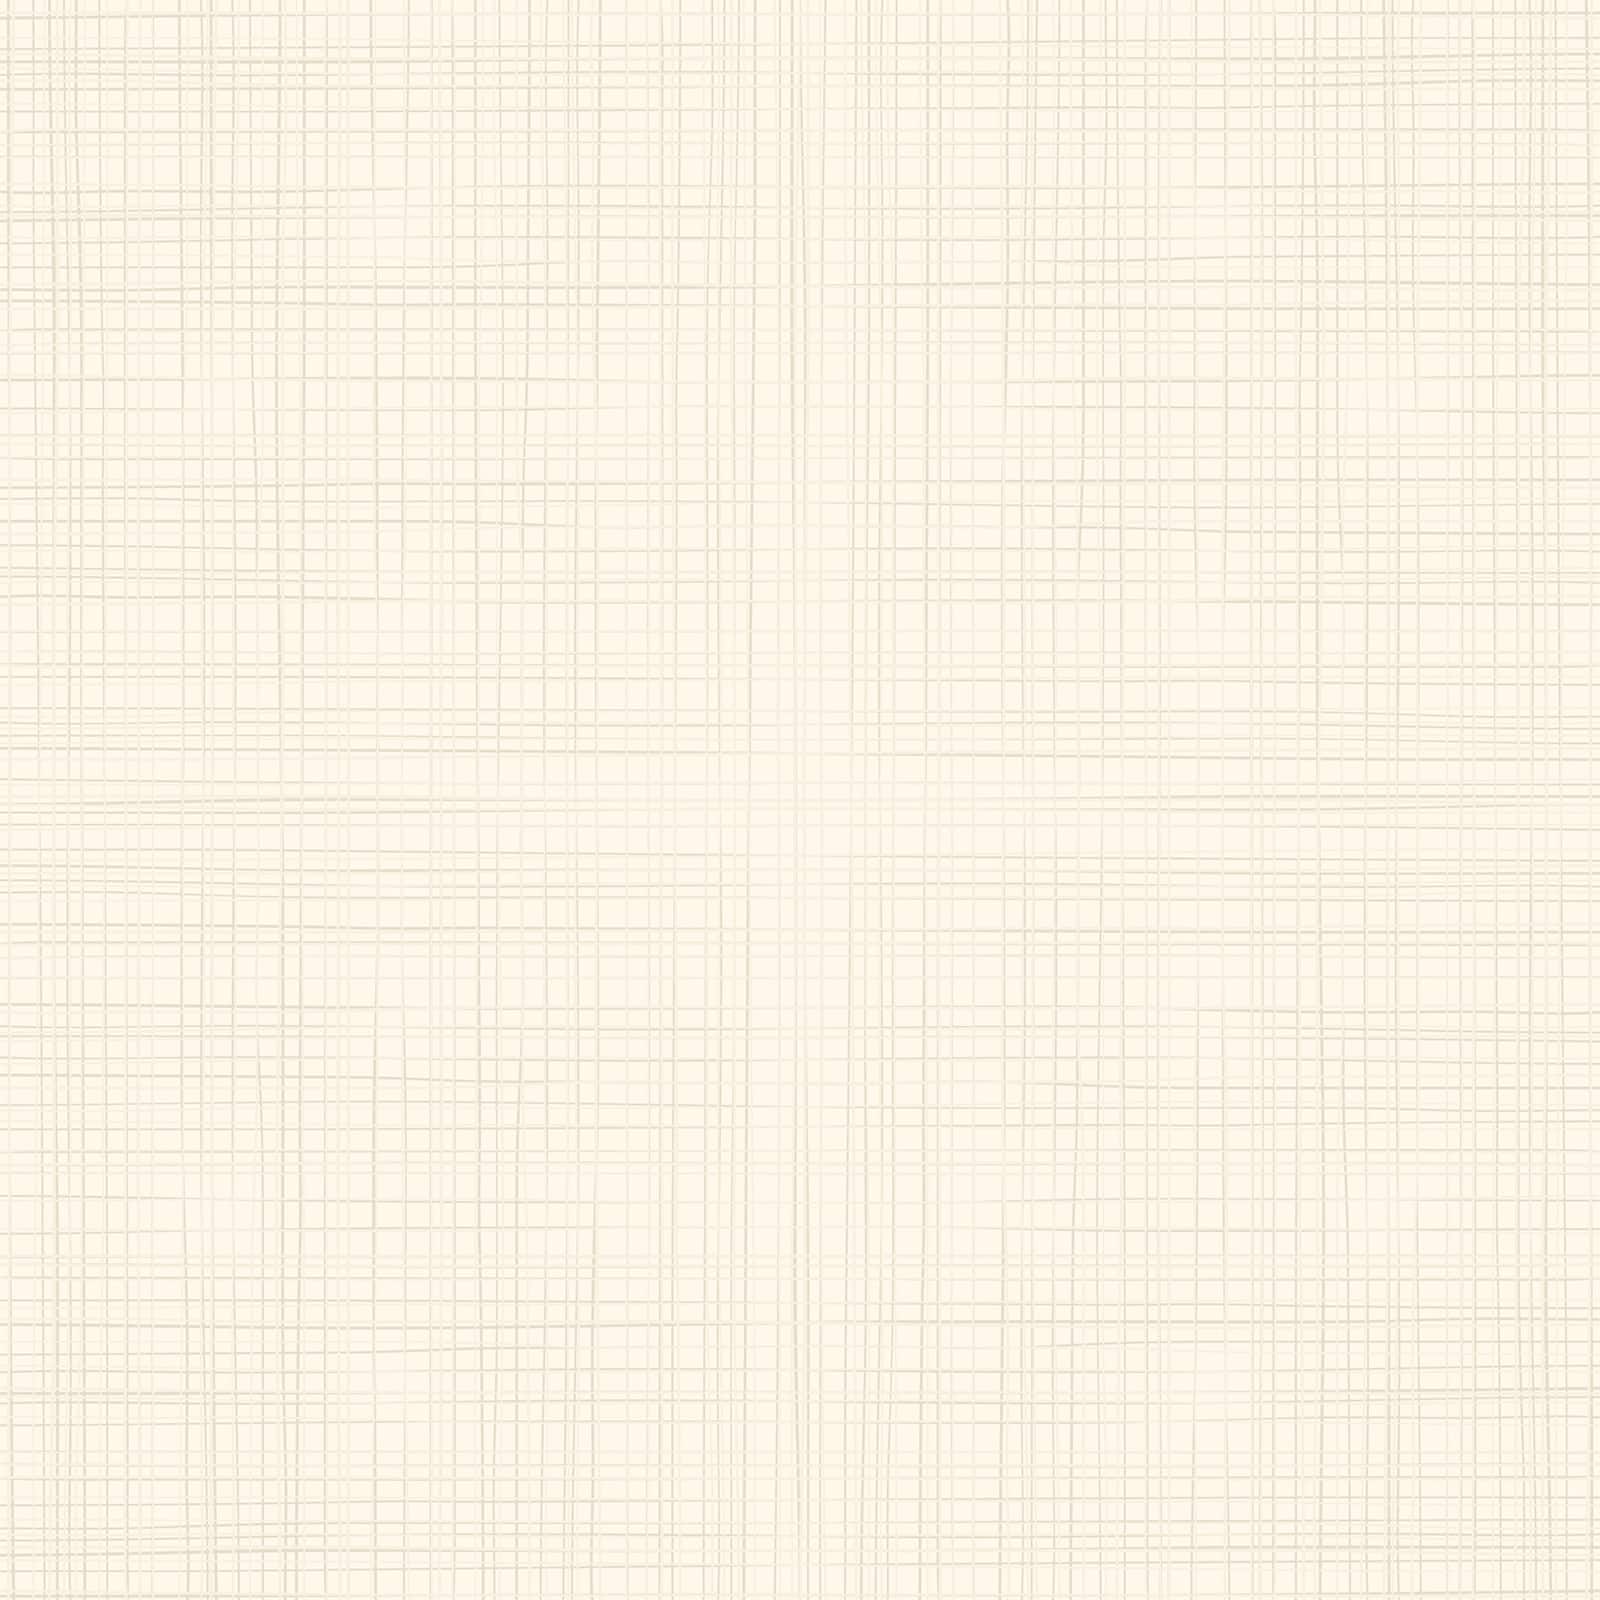 White 12 x 12 Linen Texture Cardstock by Recollections™, 60 Sheets